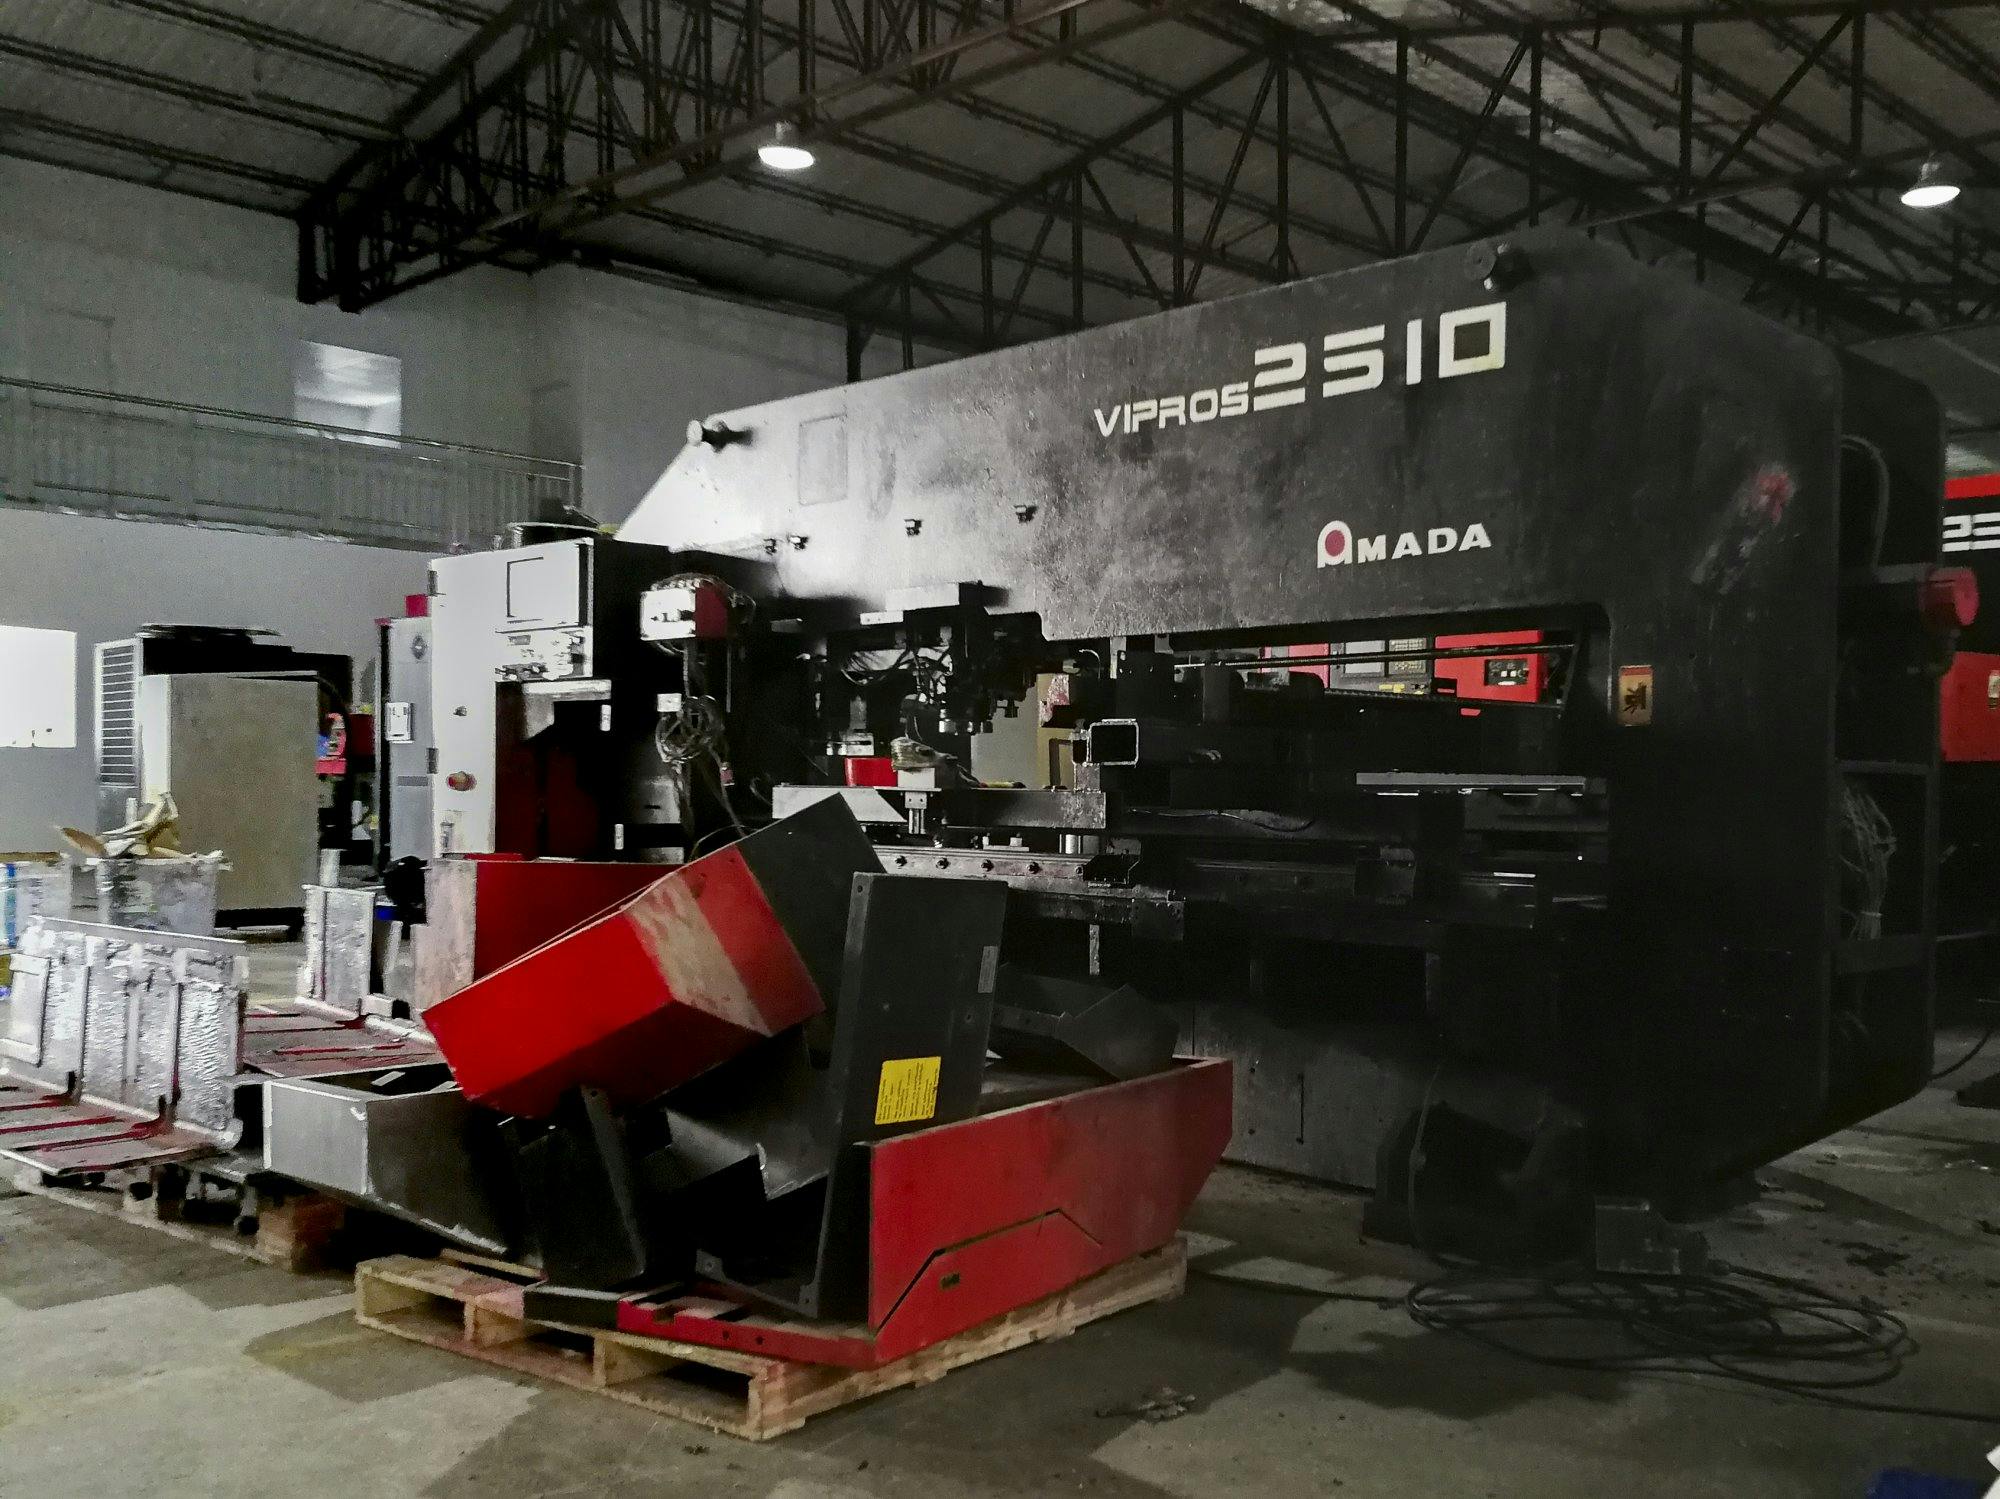 Right view of AMADA Vipros 2510 machine